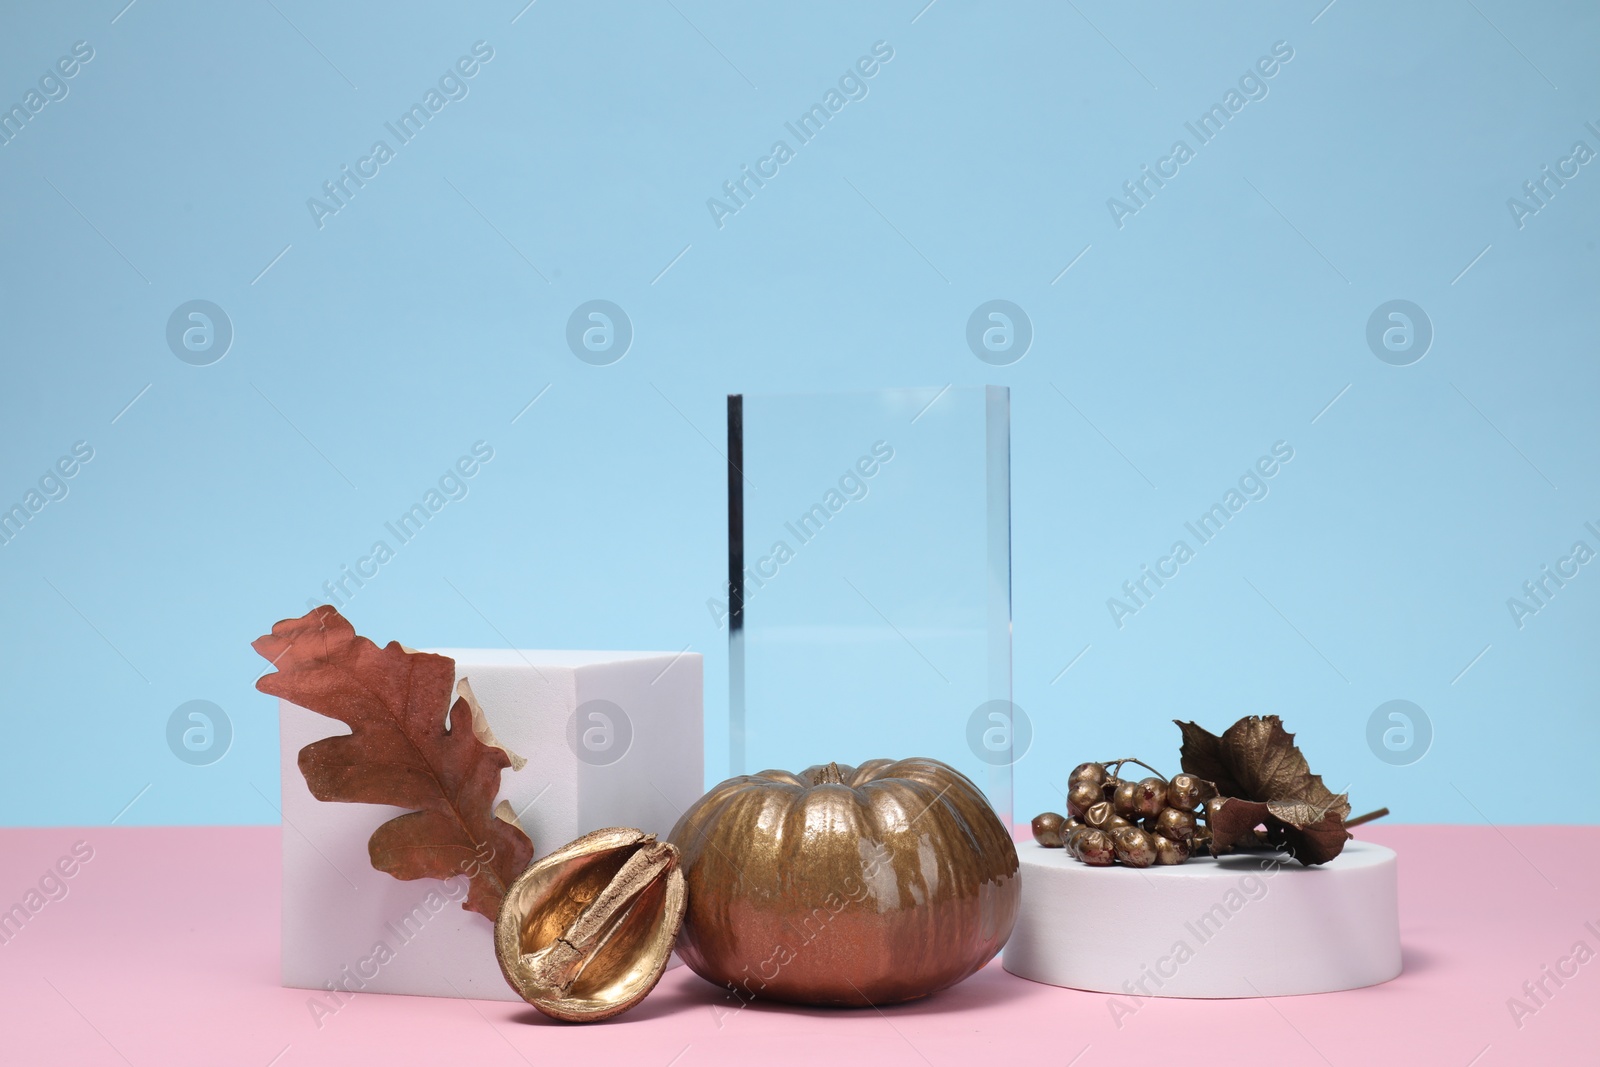 Photo of Stylish presentation for product. Geometric figures, and autumn golden decor on color background